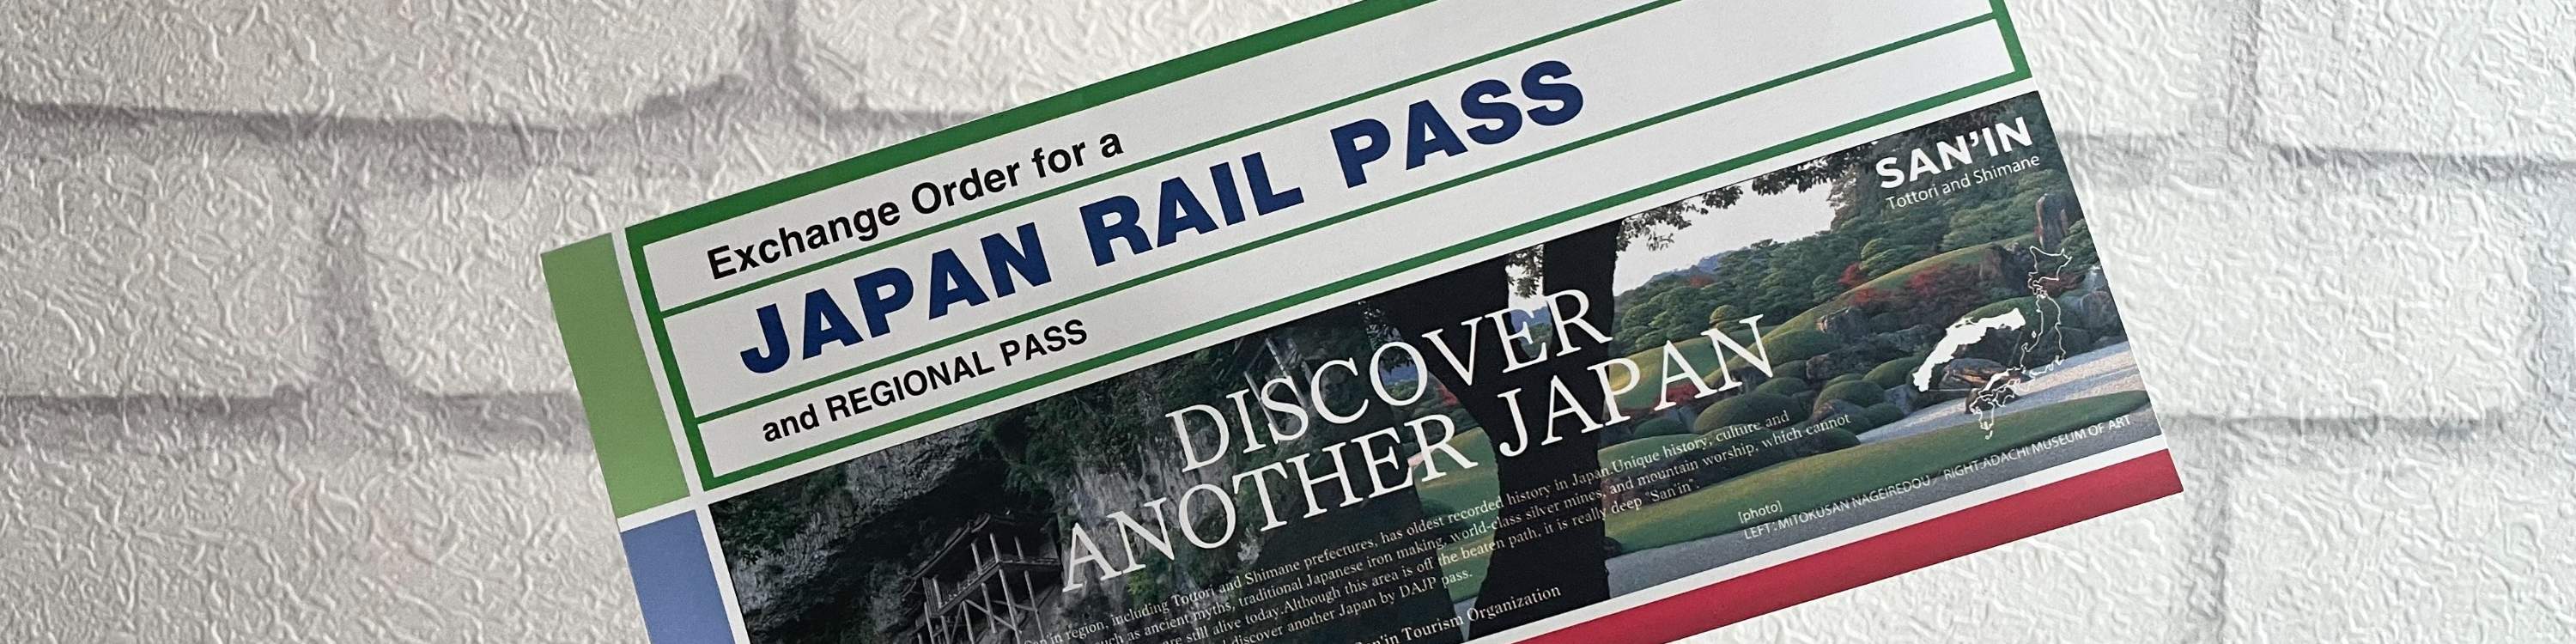 a hand holding up an exchange order for the Japan Rail Pass